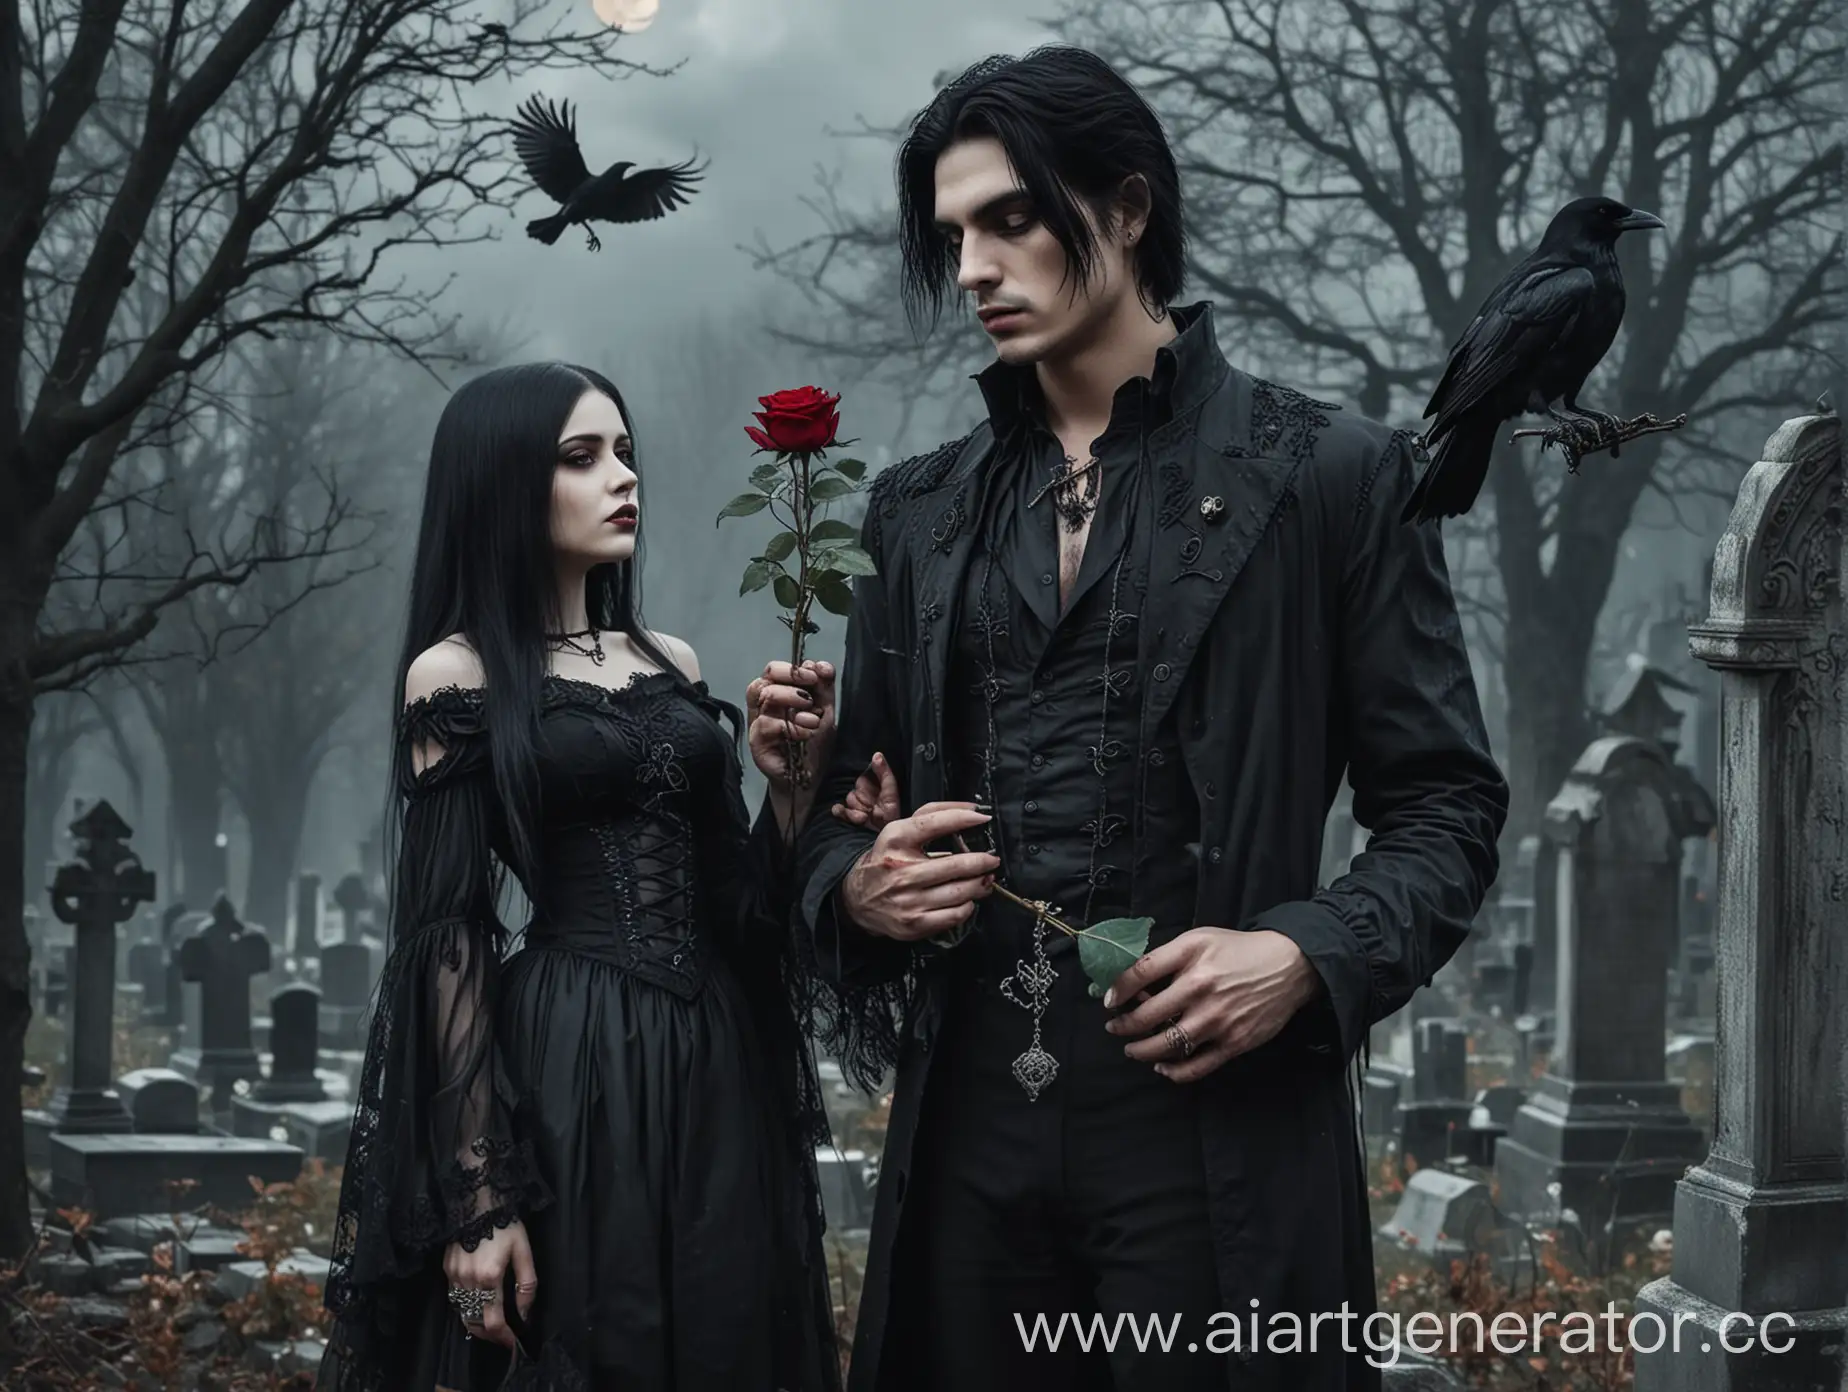 Gothic-Man-Holding-Rose-Next-to-Mysterious-Girl-in-Cemetery-Moonlight